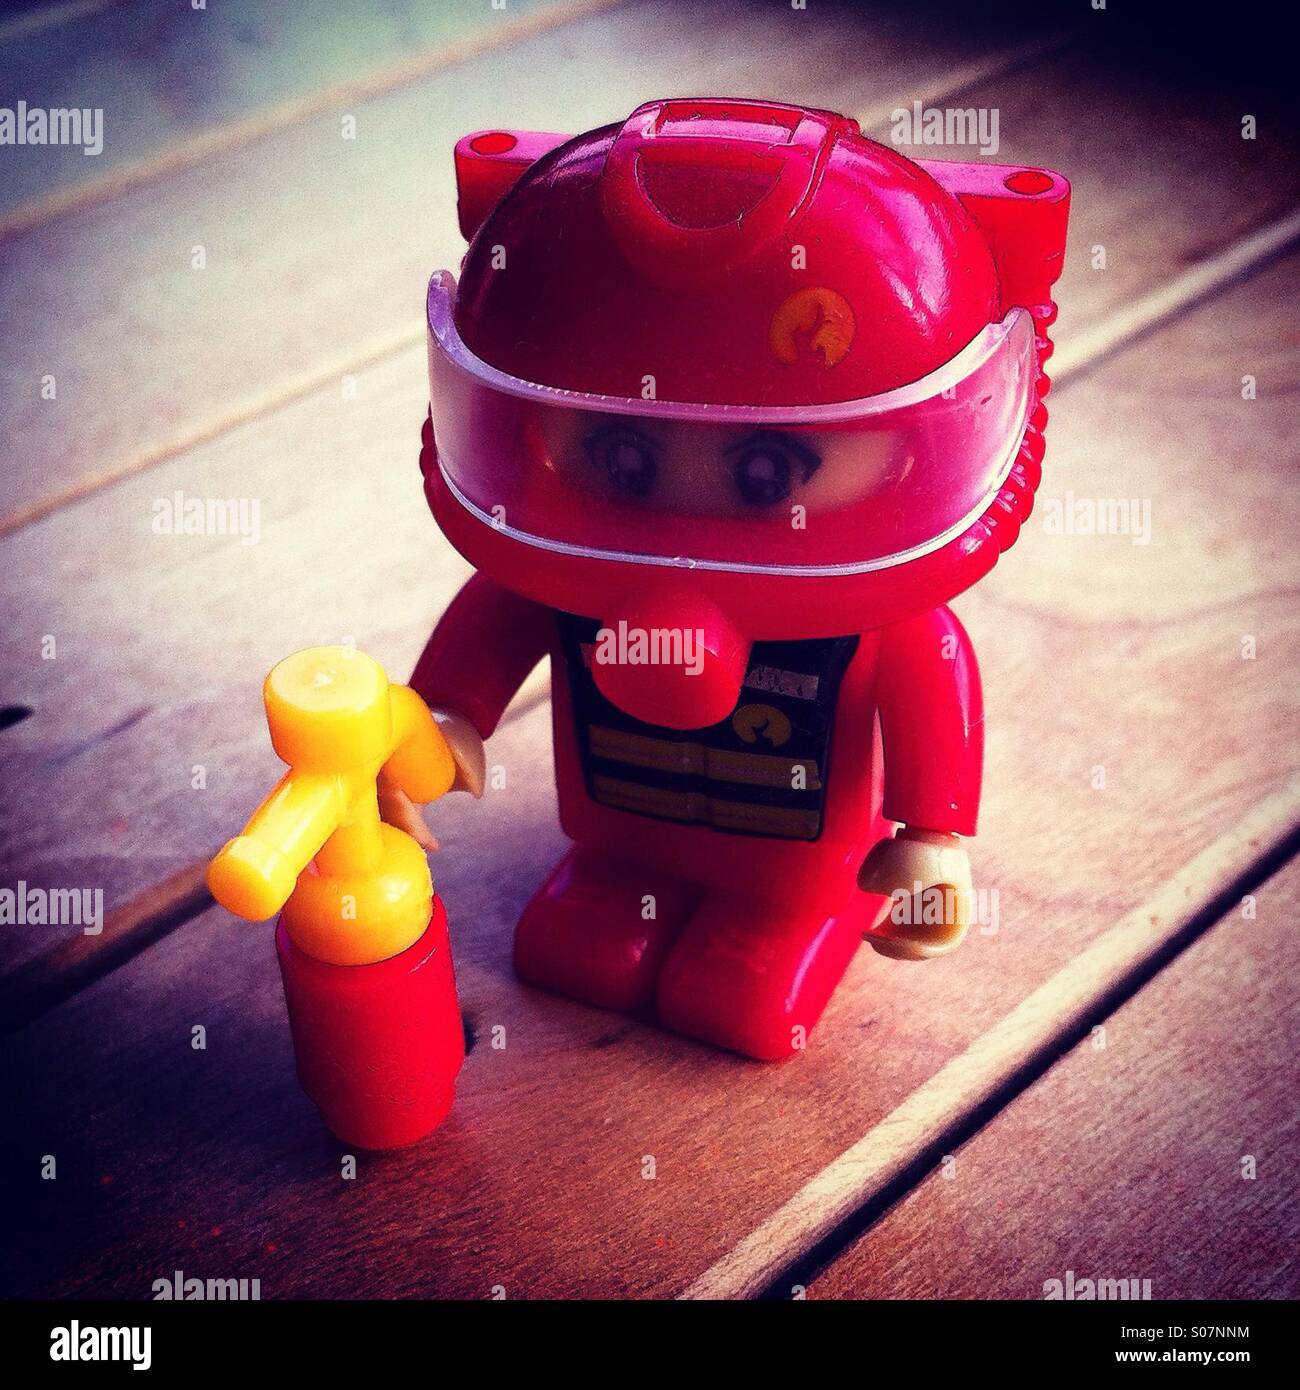 Fireman toy in red color Stock Photo